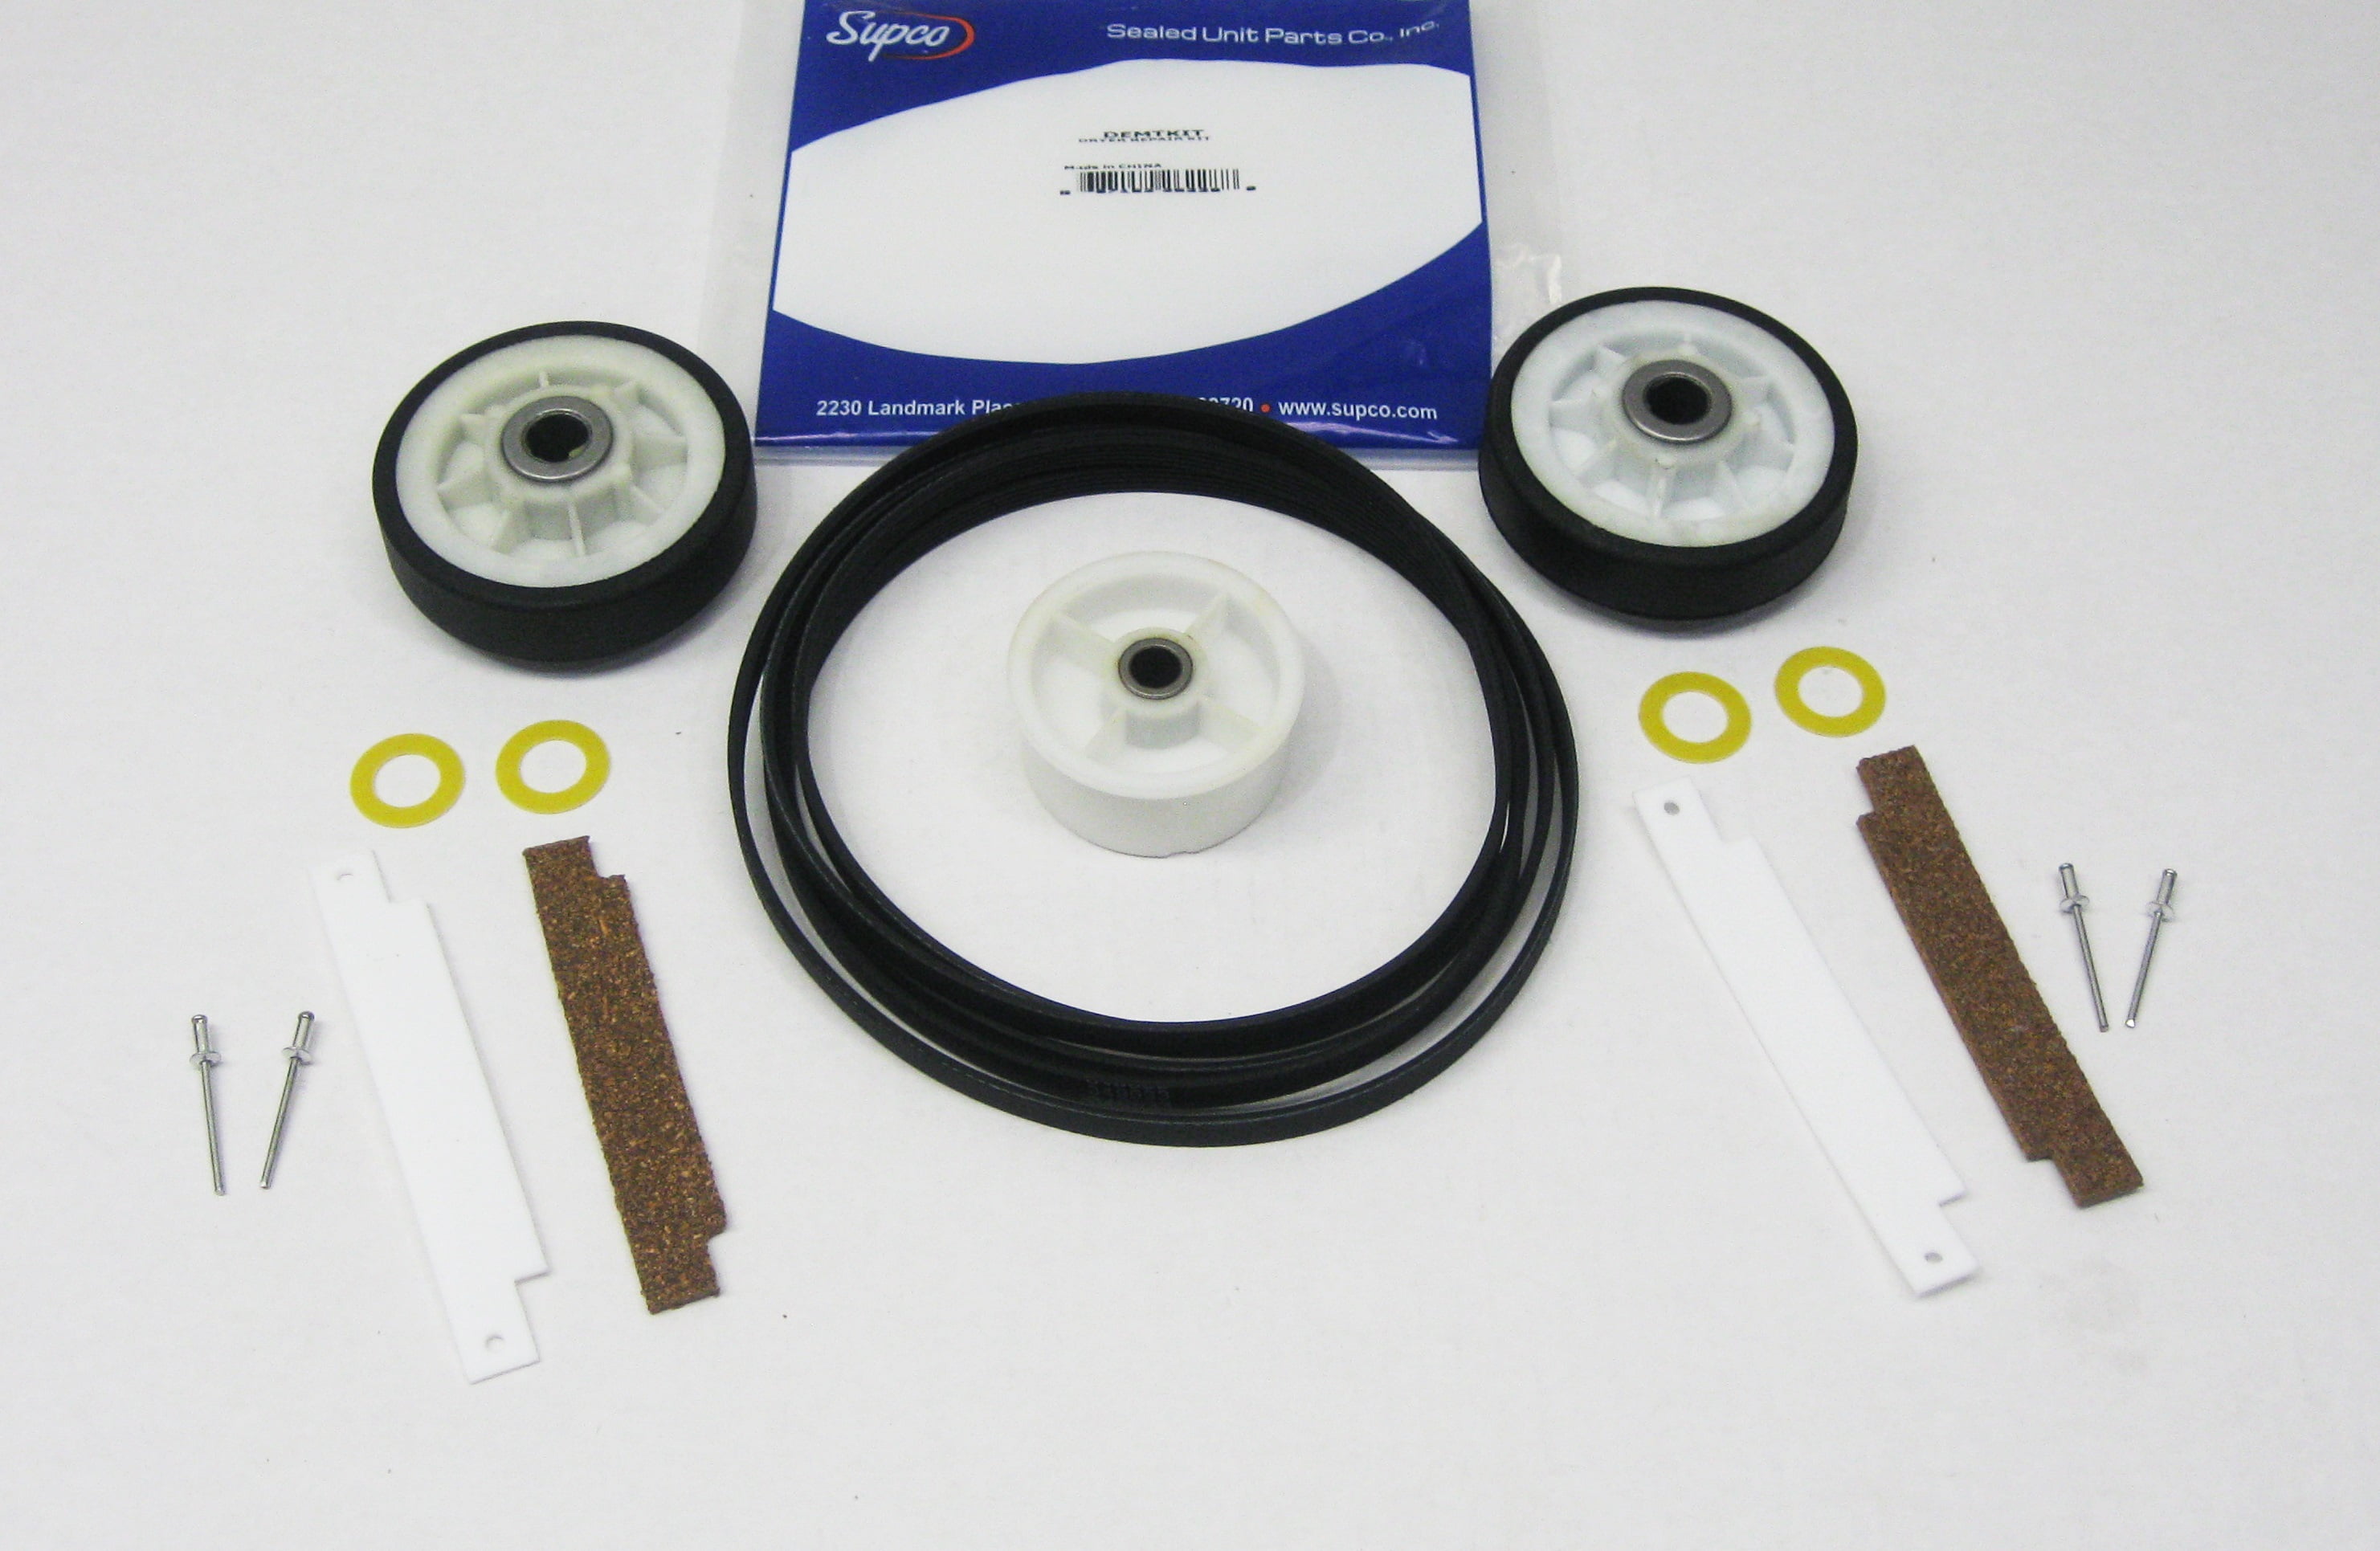 dryer-repair-maintenace-kit-for-maytag-belt-idler-pulley-glides-rollers